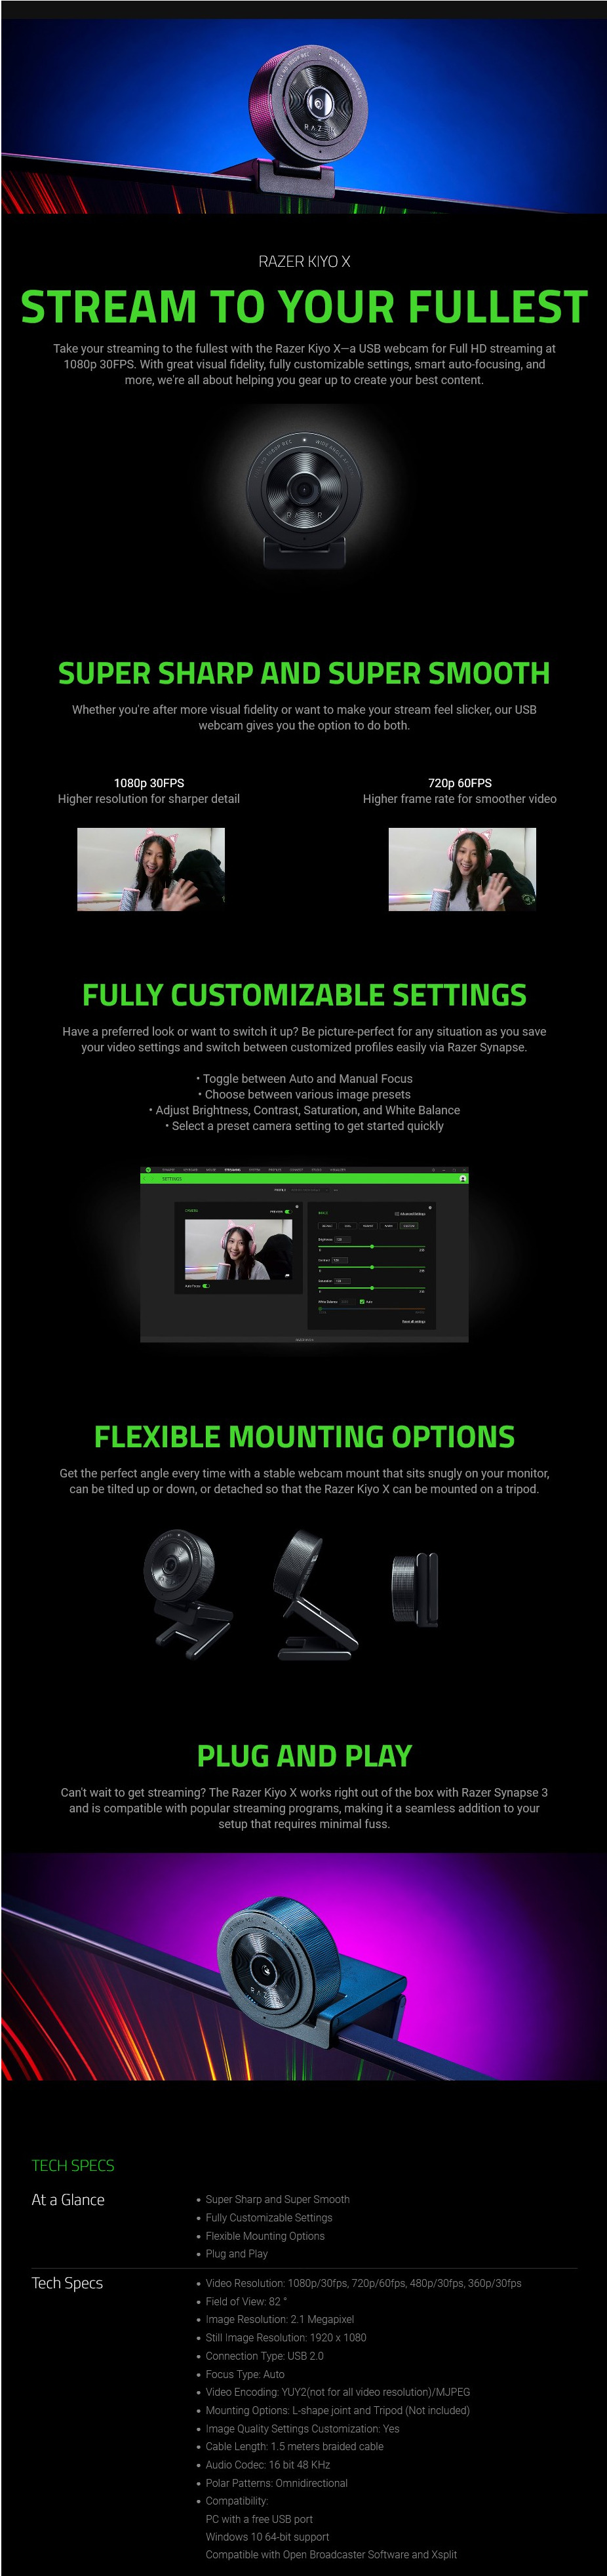 A large marketing image providing additional information about the product Razer Kiyo X - 1080p30 Full HD Streaming Webcam - Additional alt info not provided